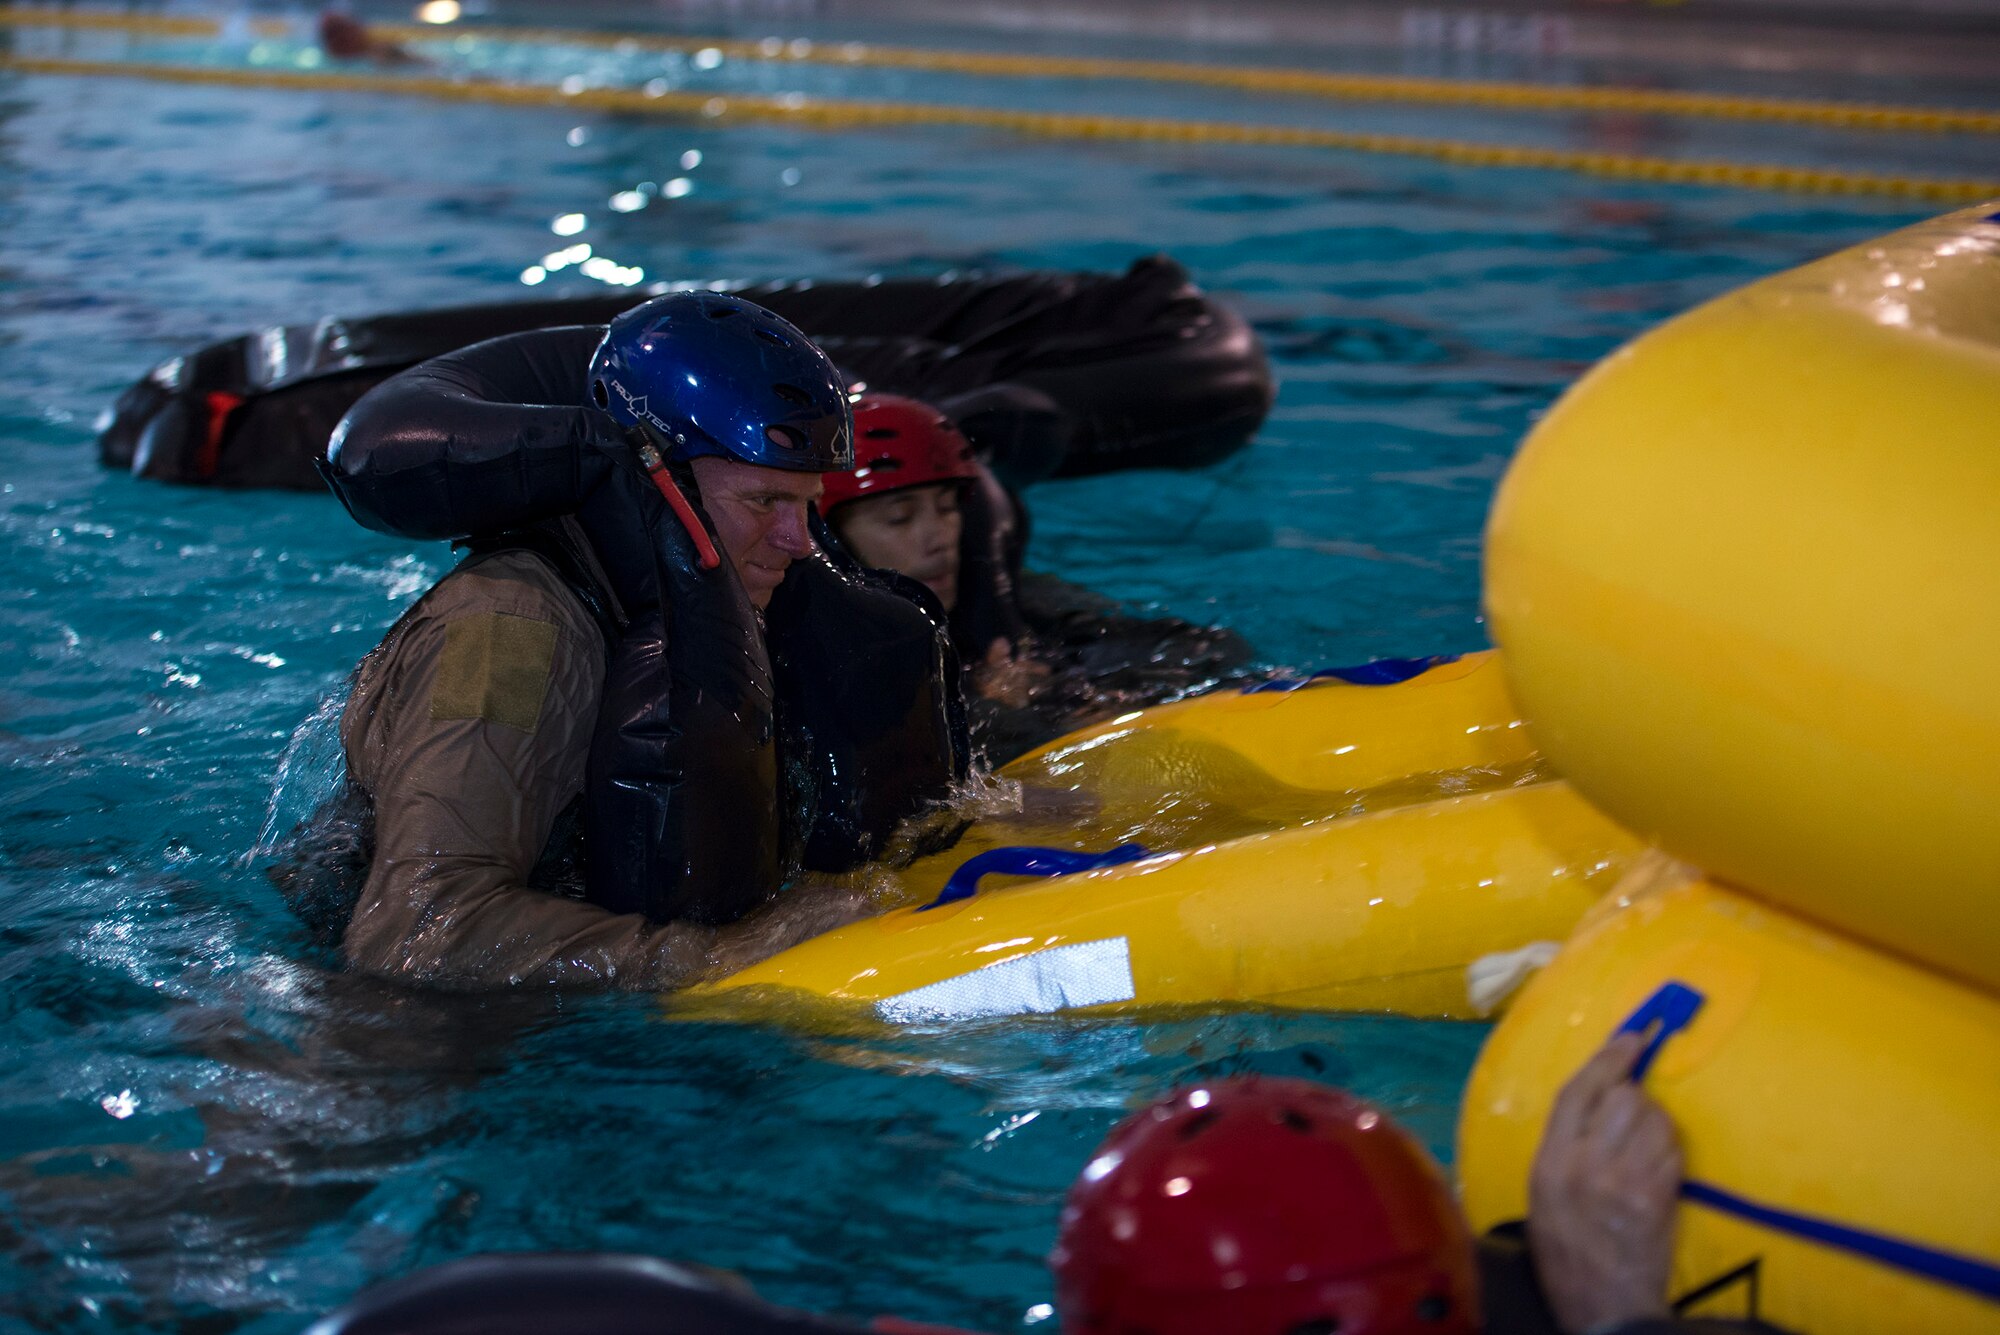 John Ryland, 81st Fighter Squadron A-29 Super Tucano civilian pilot, climbs into a 20-man raft during water survival training, Sept. 15, 2016, at Moody Air Force Base, Ga. Aircrew members must be trained every 36 months to practice their water survival skills with a multitude of gear and scenarios to be prepared in the event of an aircraft incident. (U.S. Air Force photo by Airman 1st Class Greg Nash)
